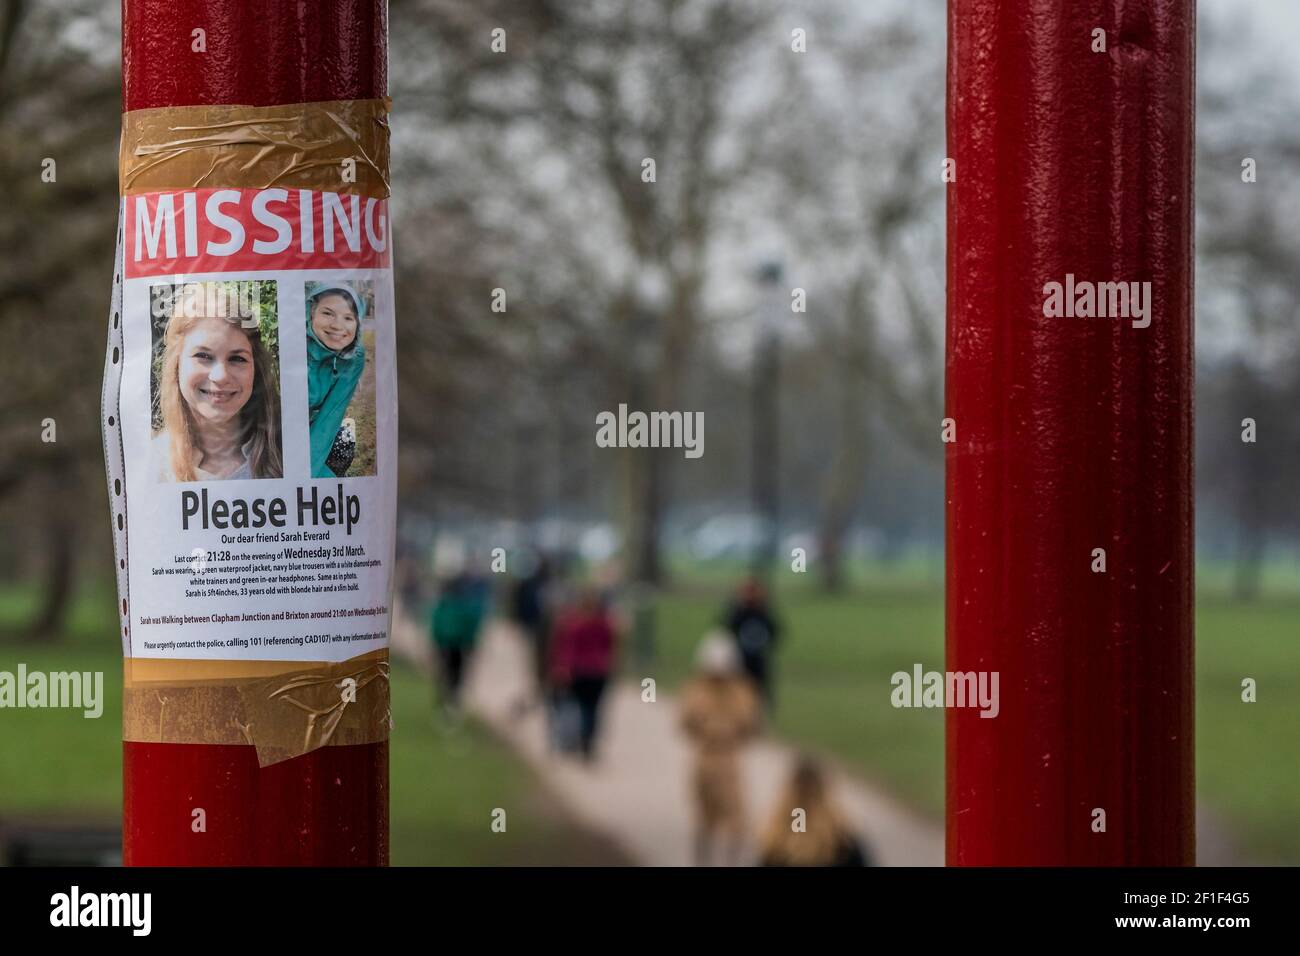 London, UK. 8th Mar, 2021. The search goes on for missing for Sarah Everard. There are signs (asking for any information) made by concerned friends on Clapham Common. She disappeared after 9:00 on March 3 somewhere between Clapham Junction and Brixton and recent cctv suggests she had made it past the common onto Poynders Road. Credit: Guy Bell/Alamy Live News Stock Photo